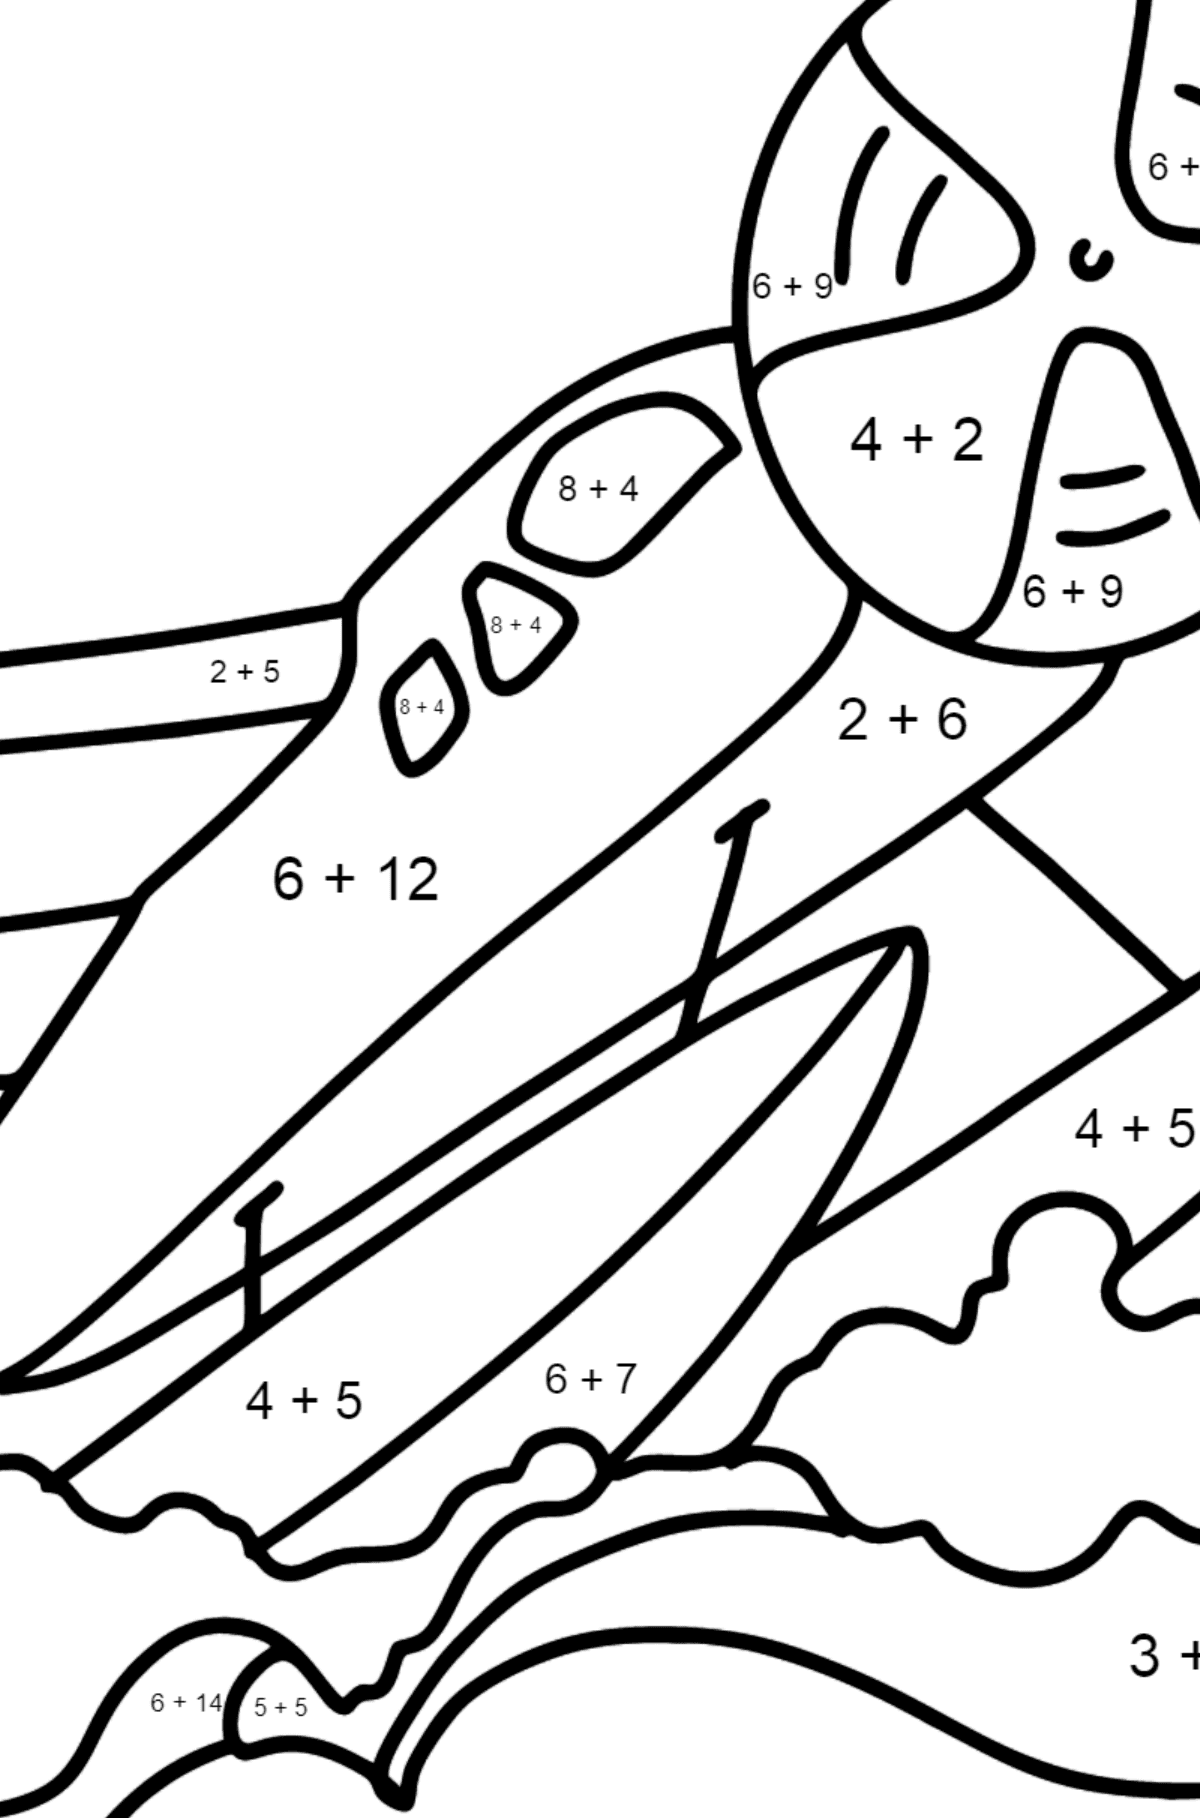 Amphibious Airplane coloring page - Math Coloring - Addition for Kids